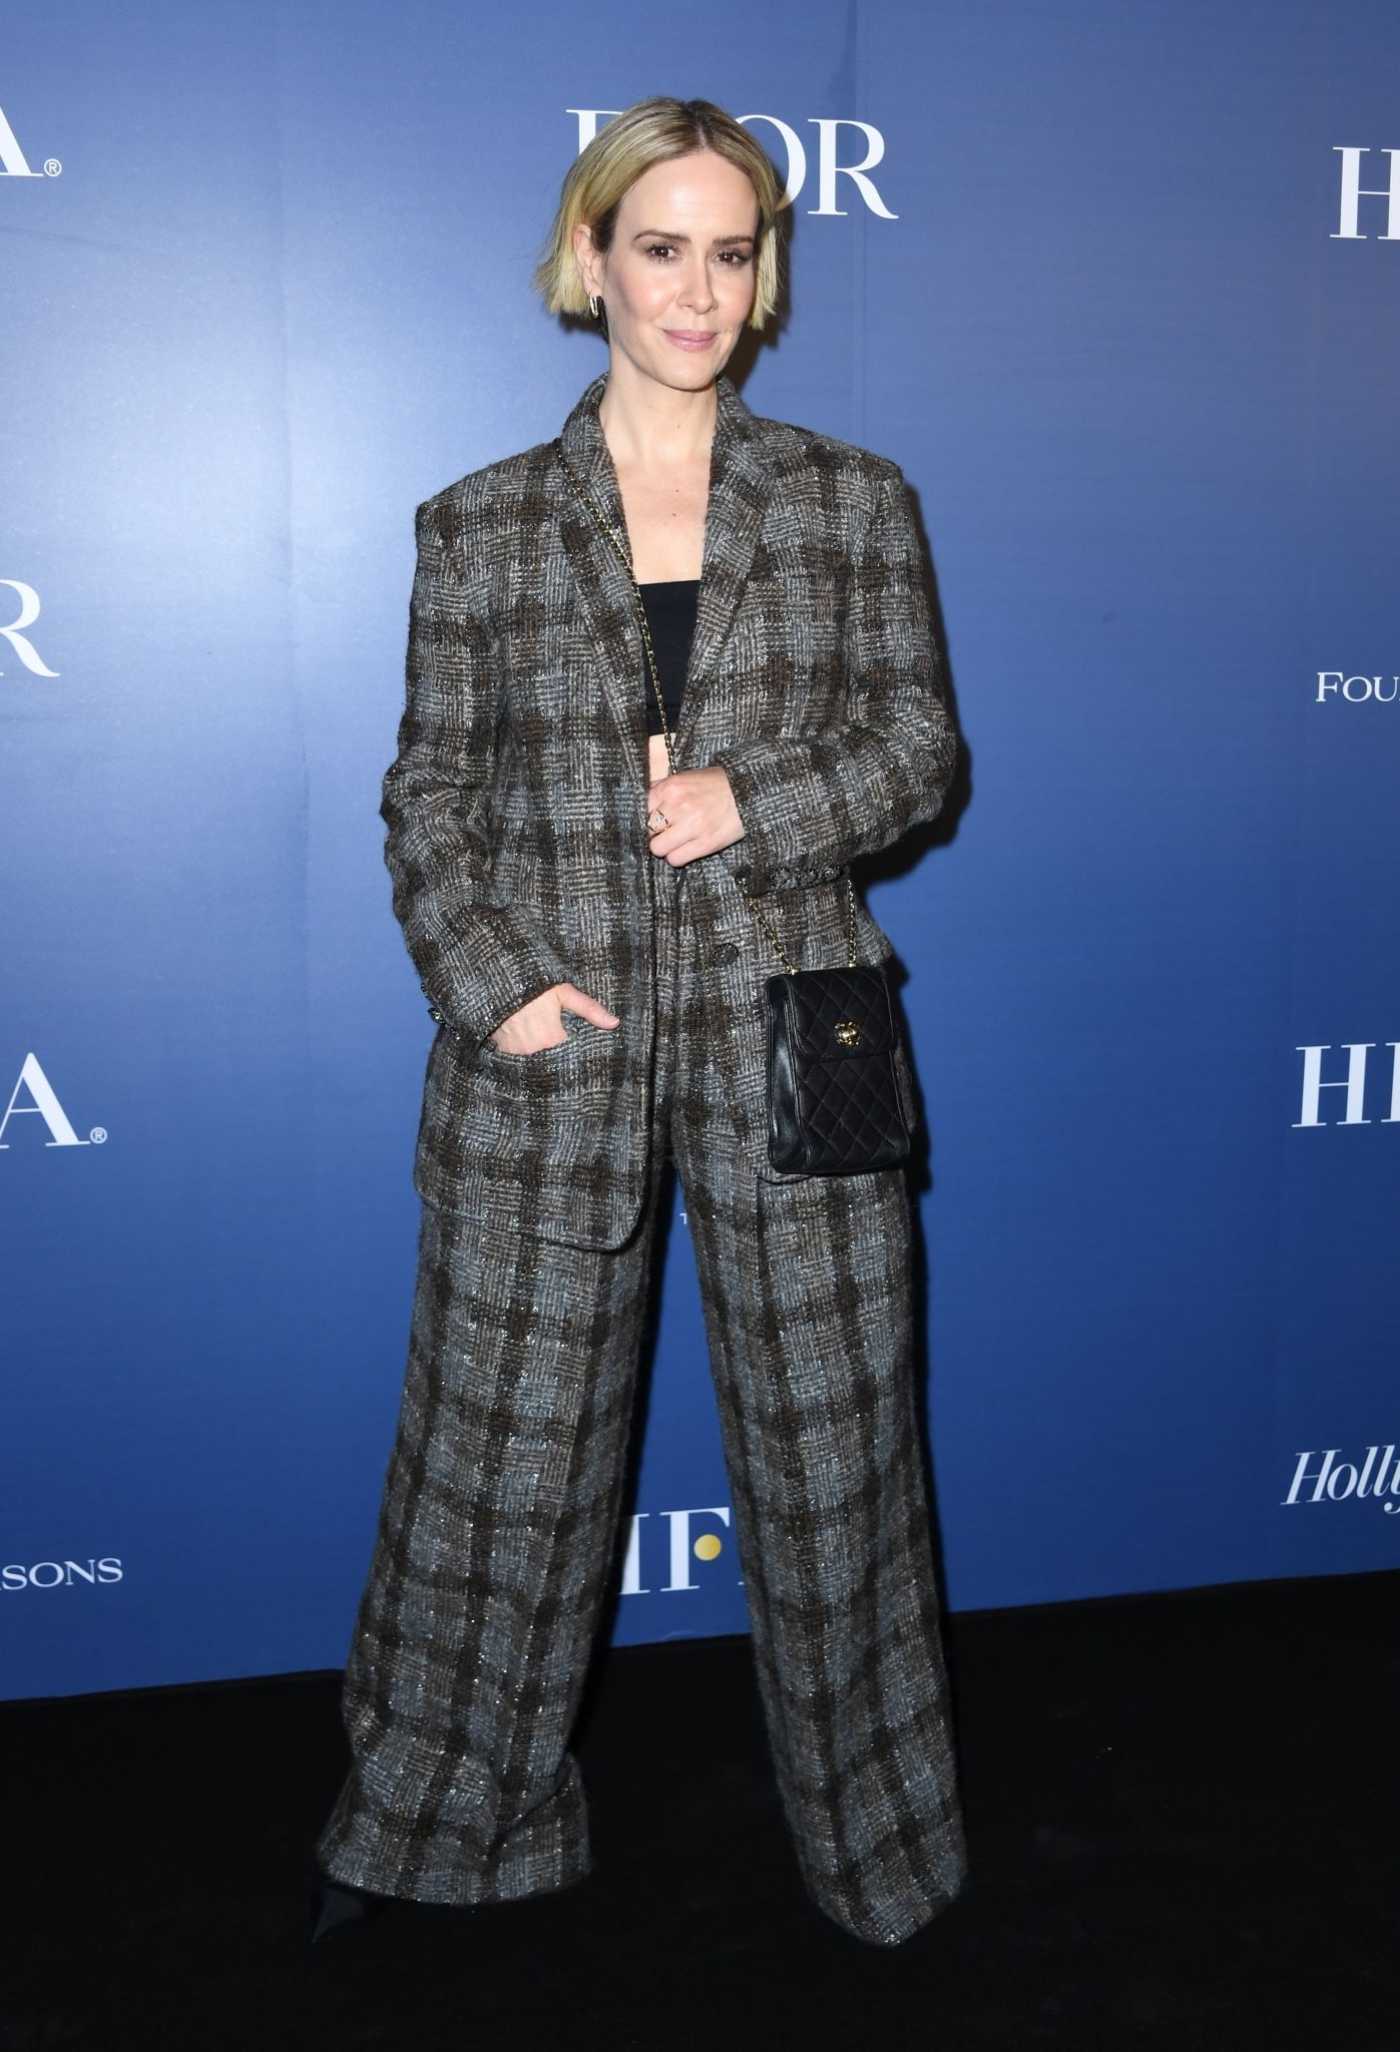 Sarah Paulson Attends the HFPA/THR TIFF PARTY During 2019 Toronto International Film Festival in Toronto 09/07/2019